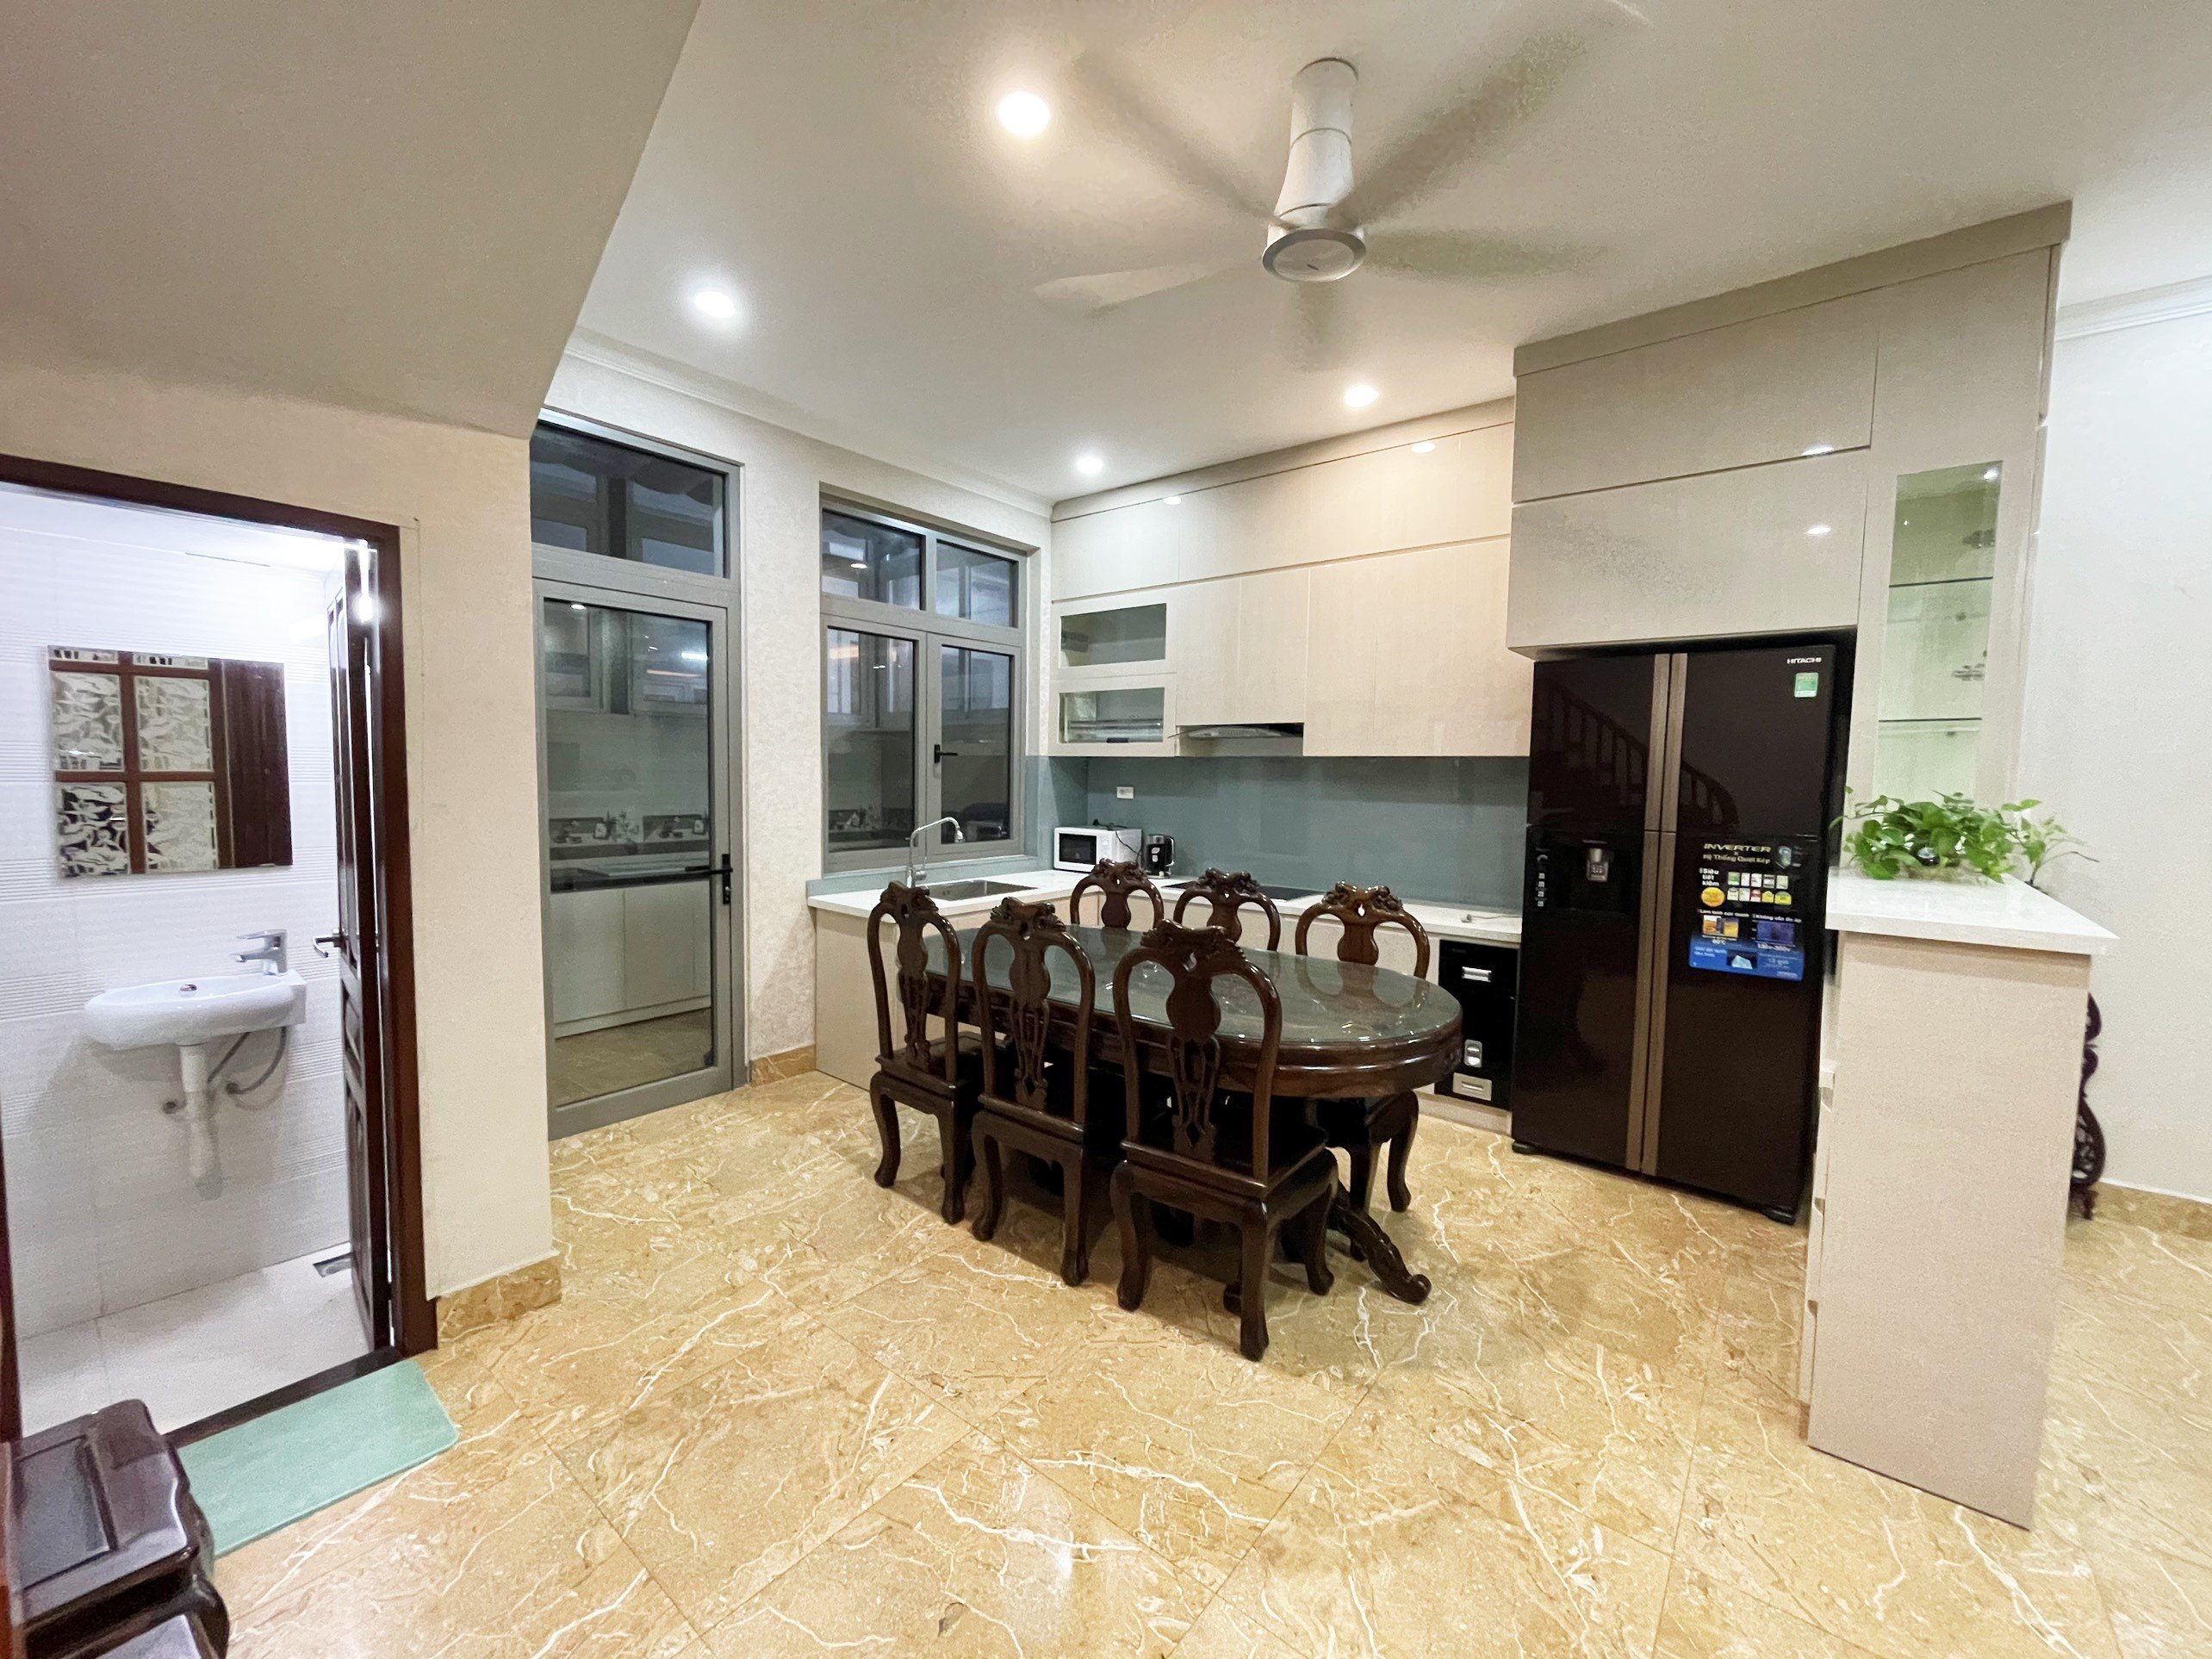 Full Furniture Villa in Nguyen Que area Vinhomes The Harmony for rent only 1300 usd/month